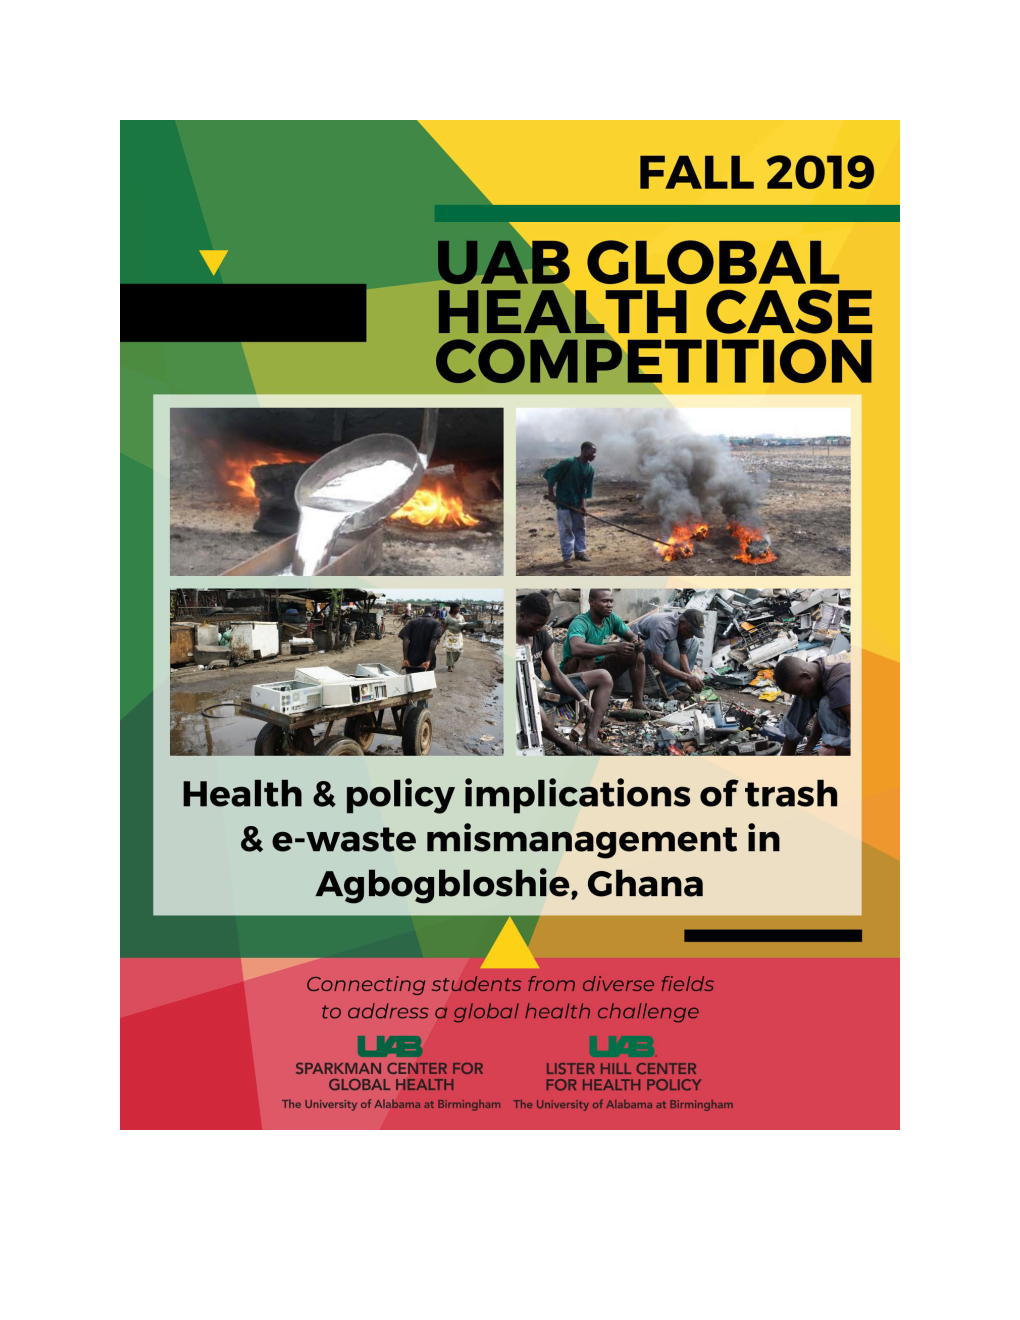 Health & Policy Implications of Trash & E-Waste Mismanagement In